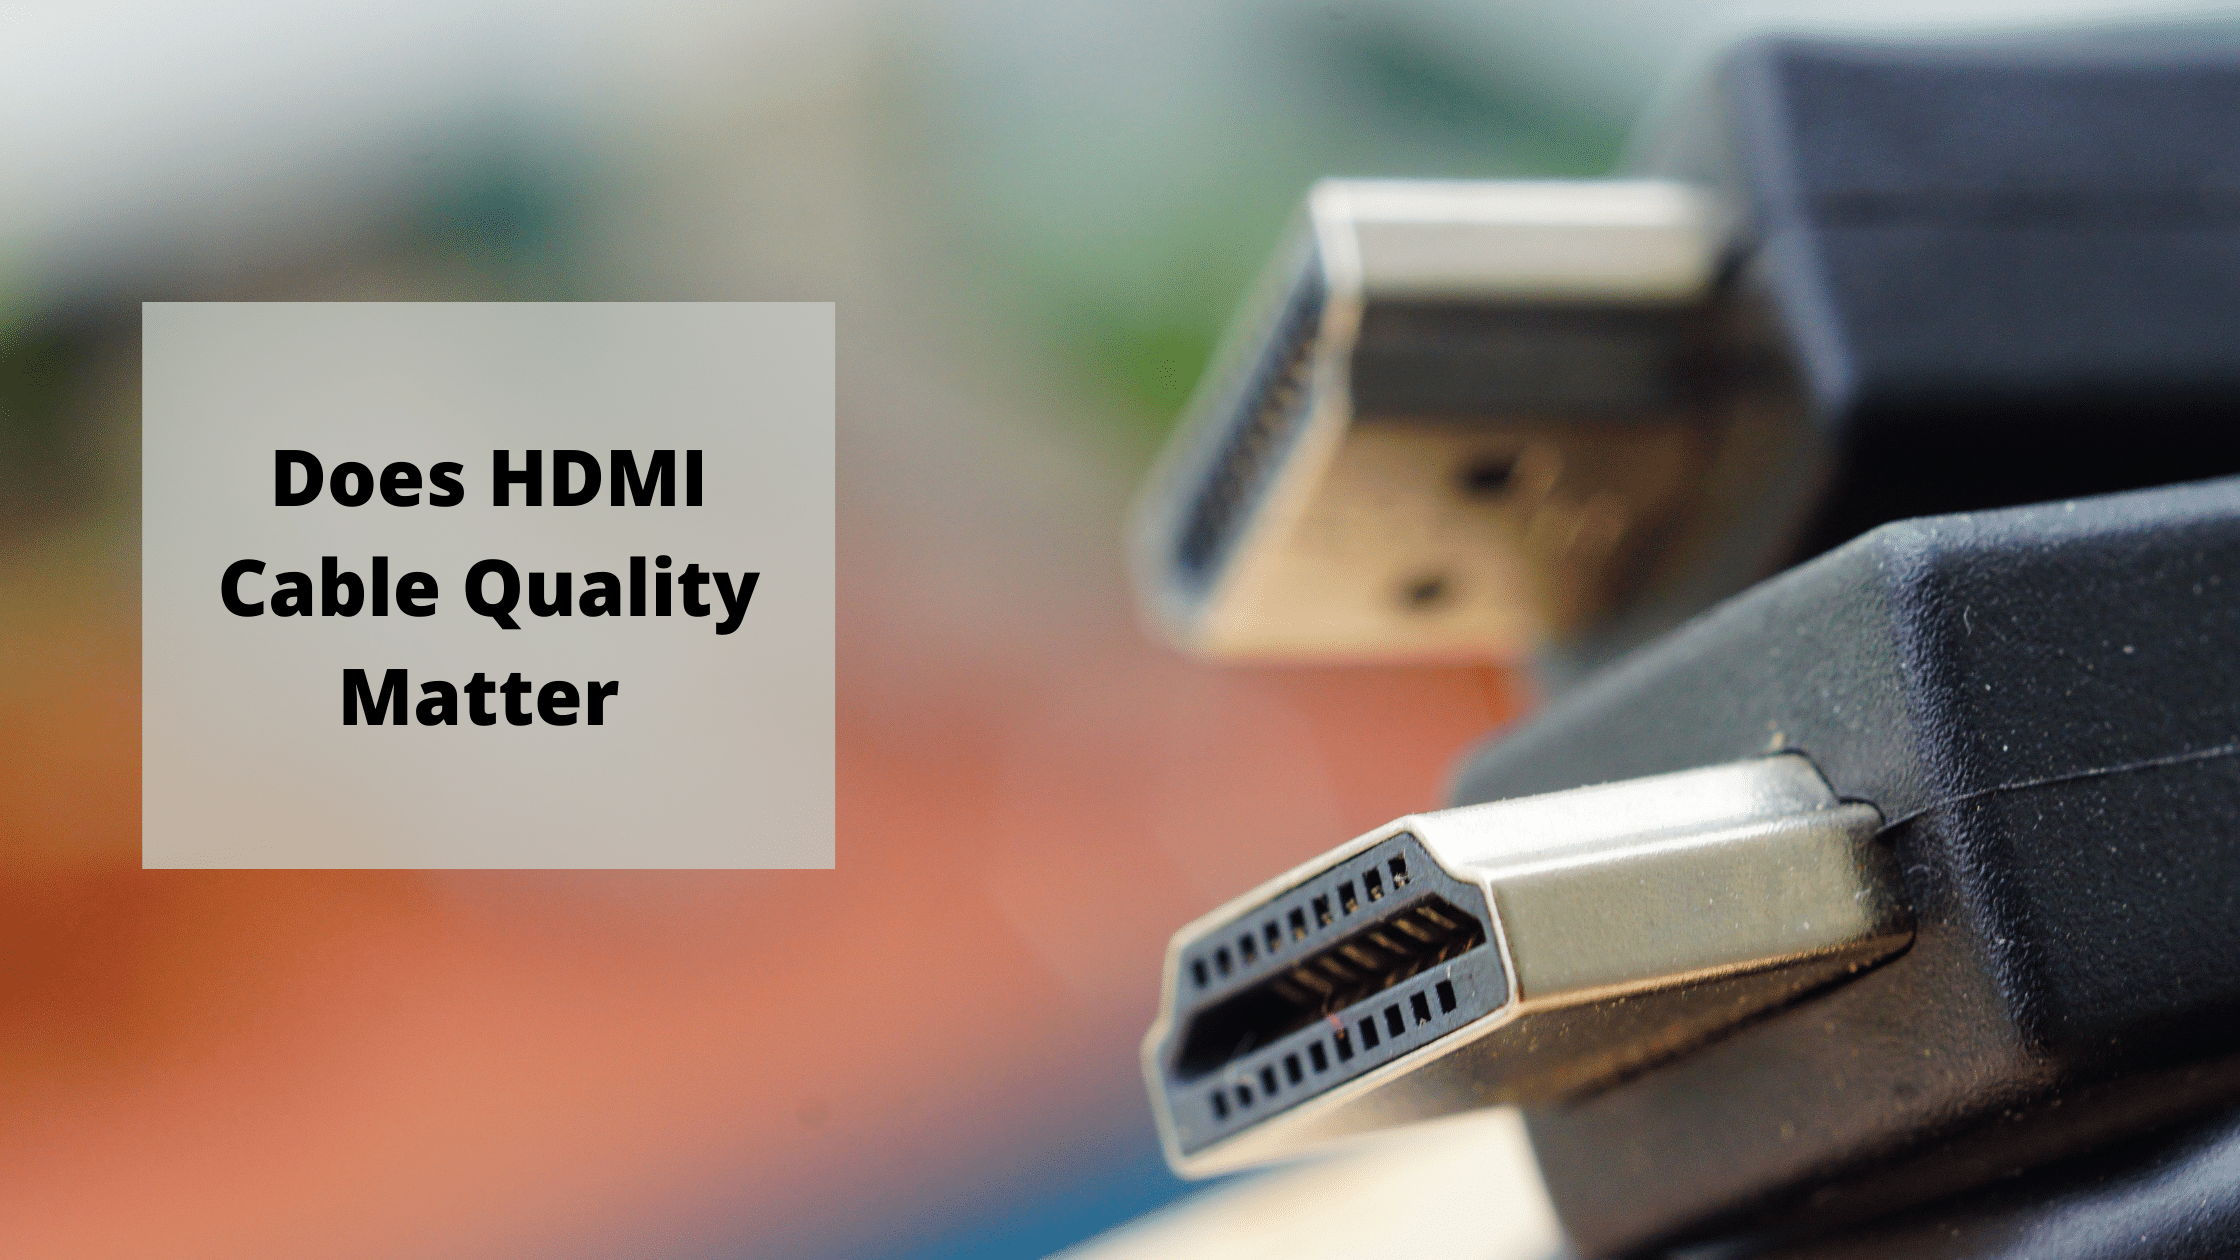 Does HDMI Cable Quality Matter